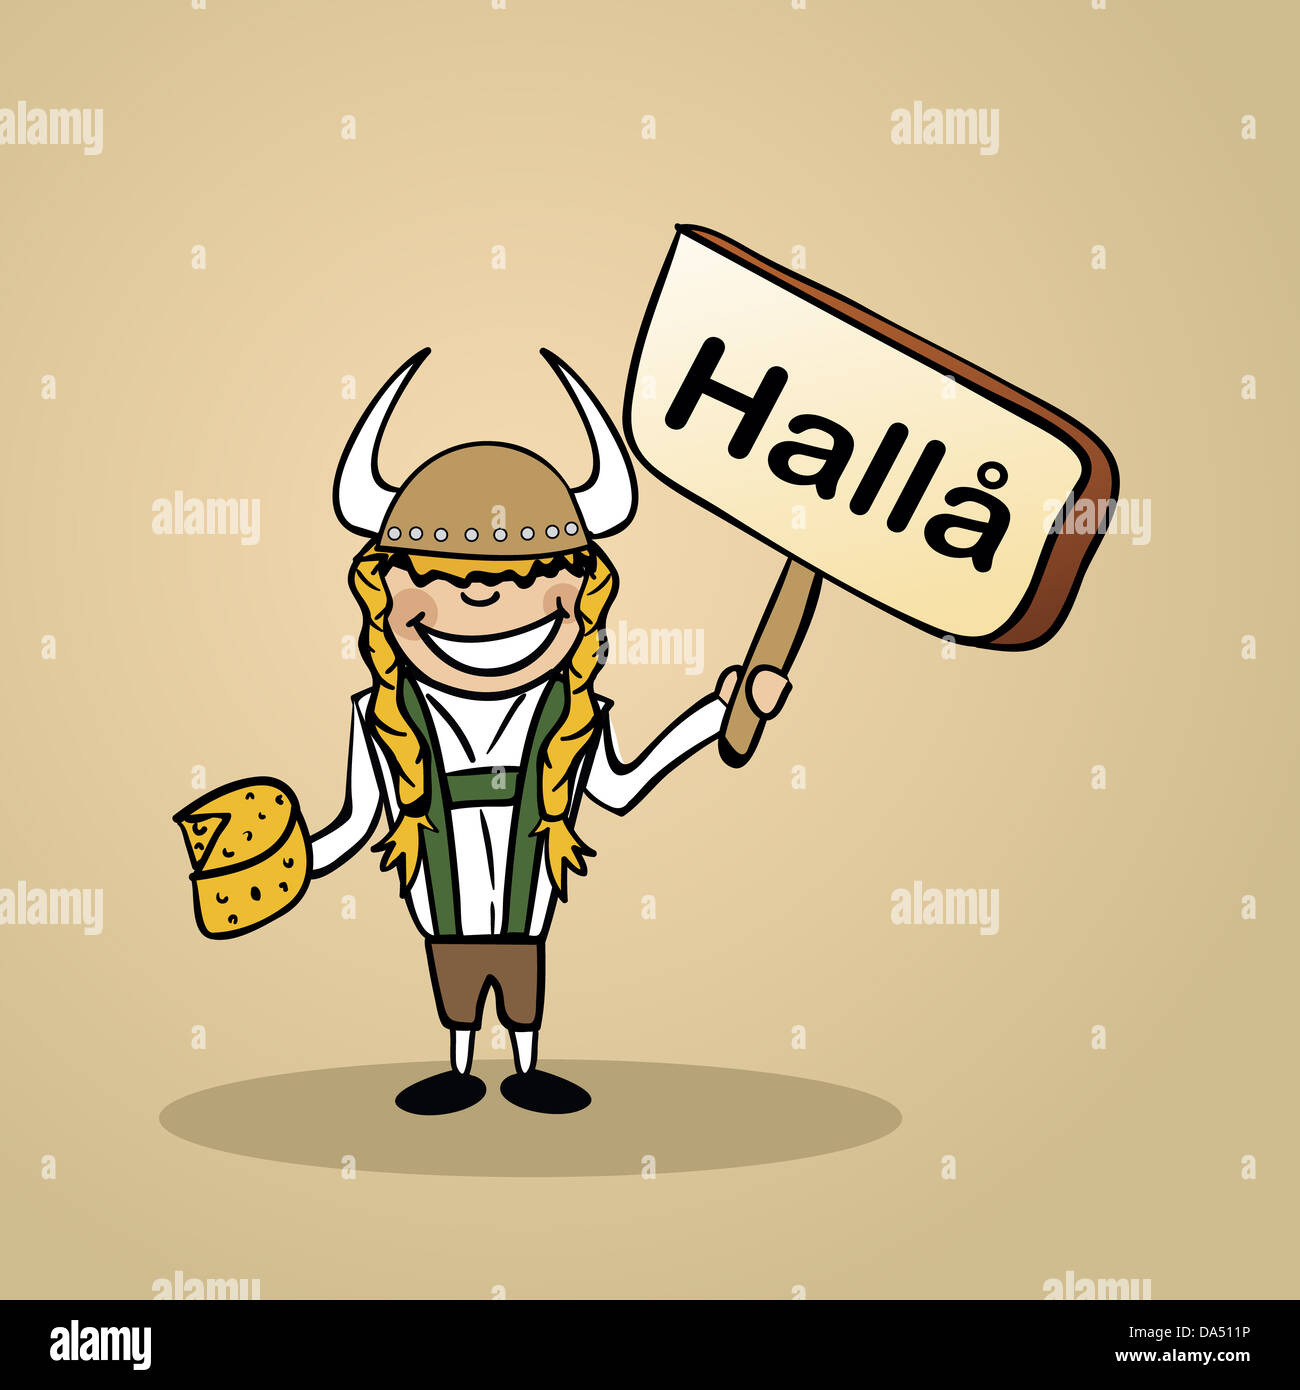 Trendy swedish man says Hello holding a wooden sign sketch. Vector file illustration layered for easy editing. Stock Photo